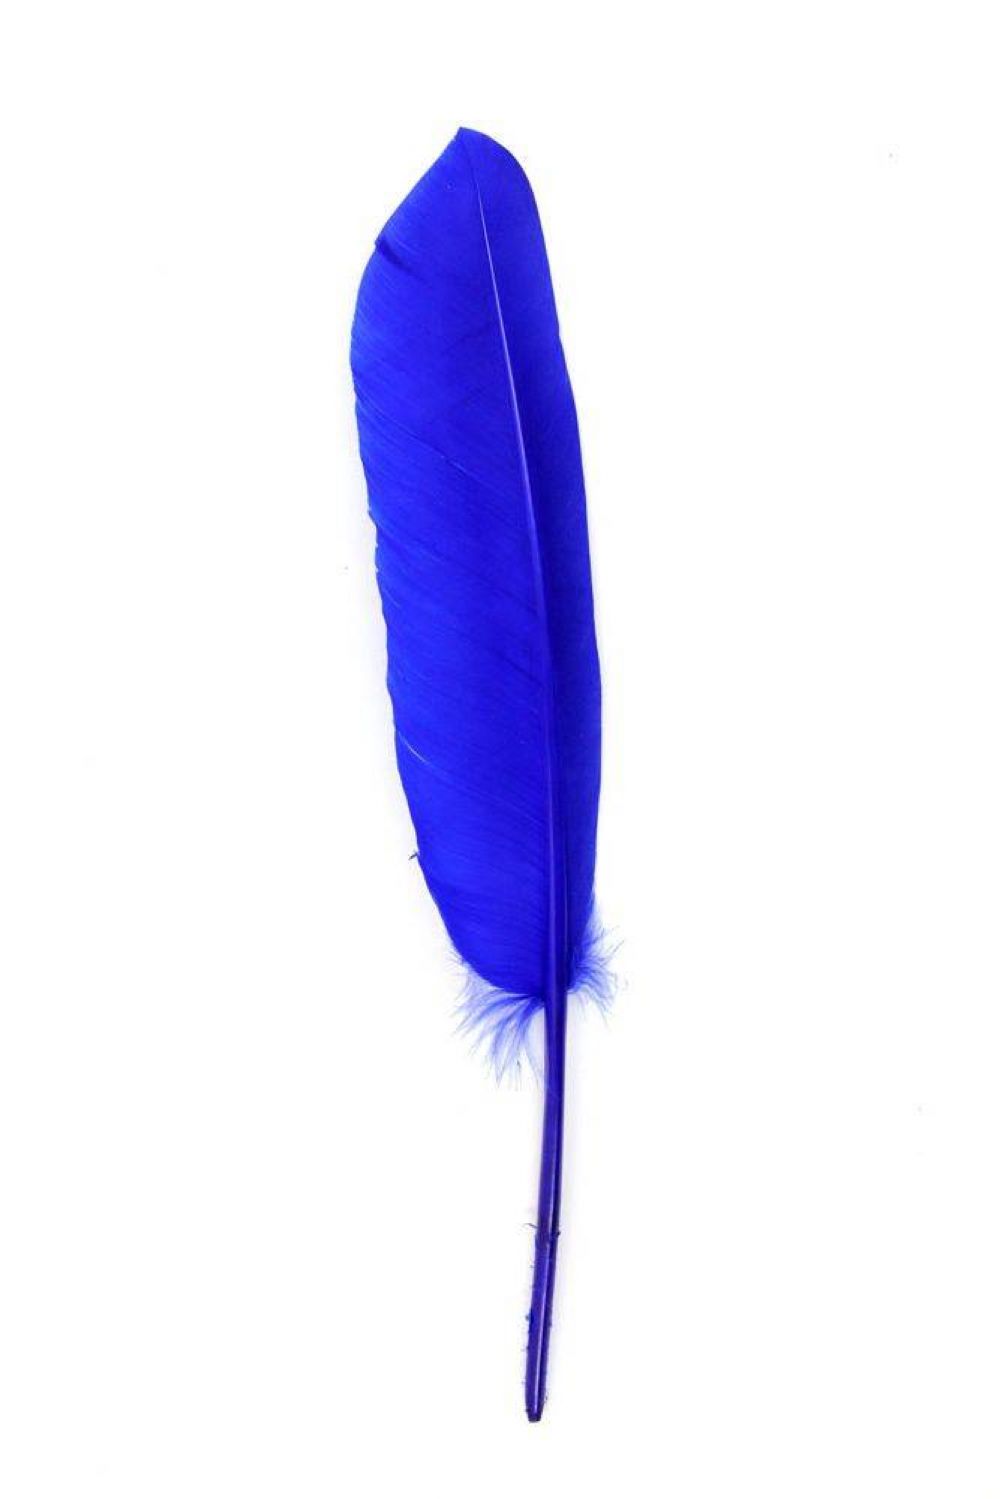 Goose Pointers 22-27cm, blue, Pack of 10